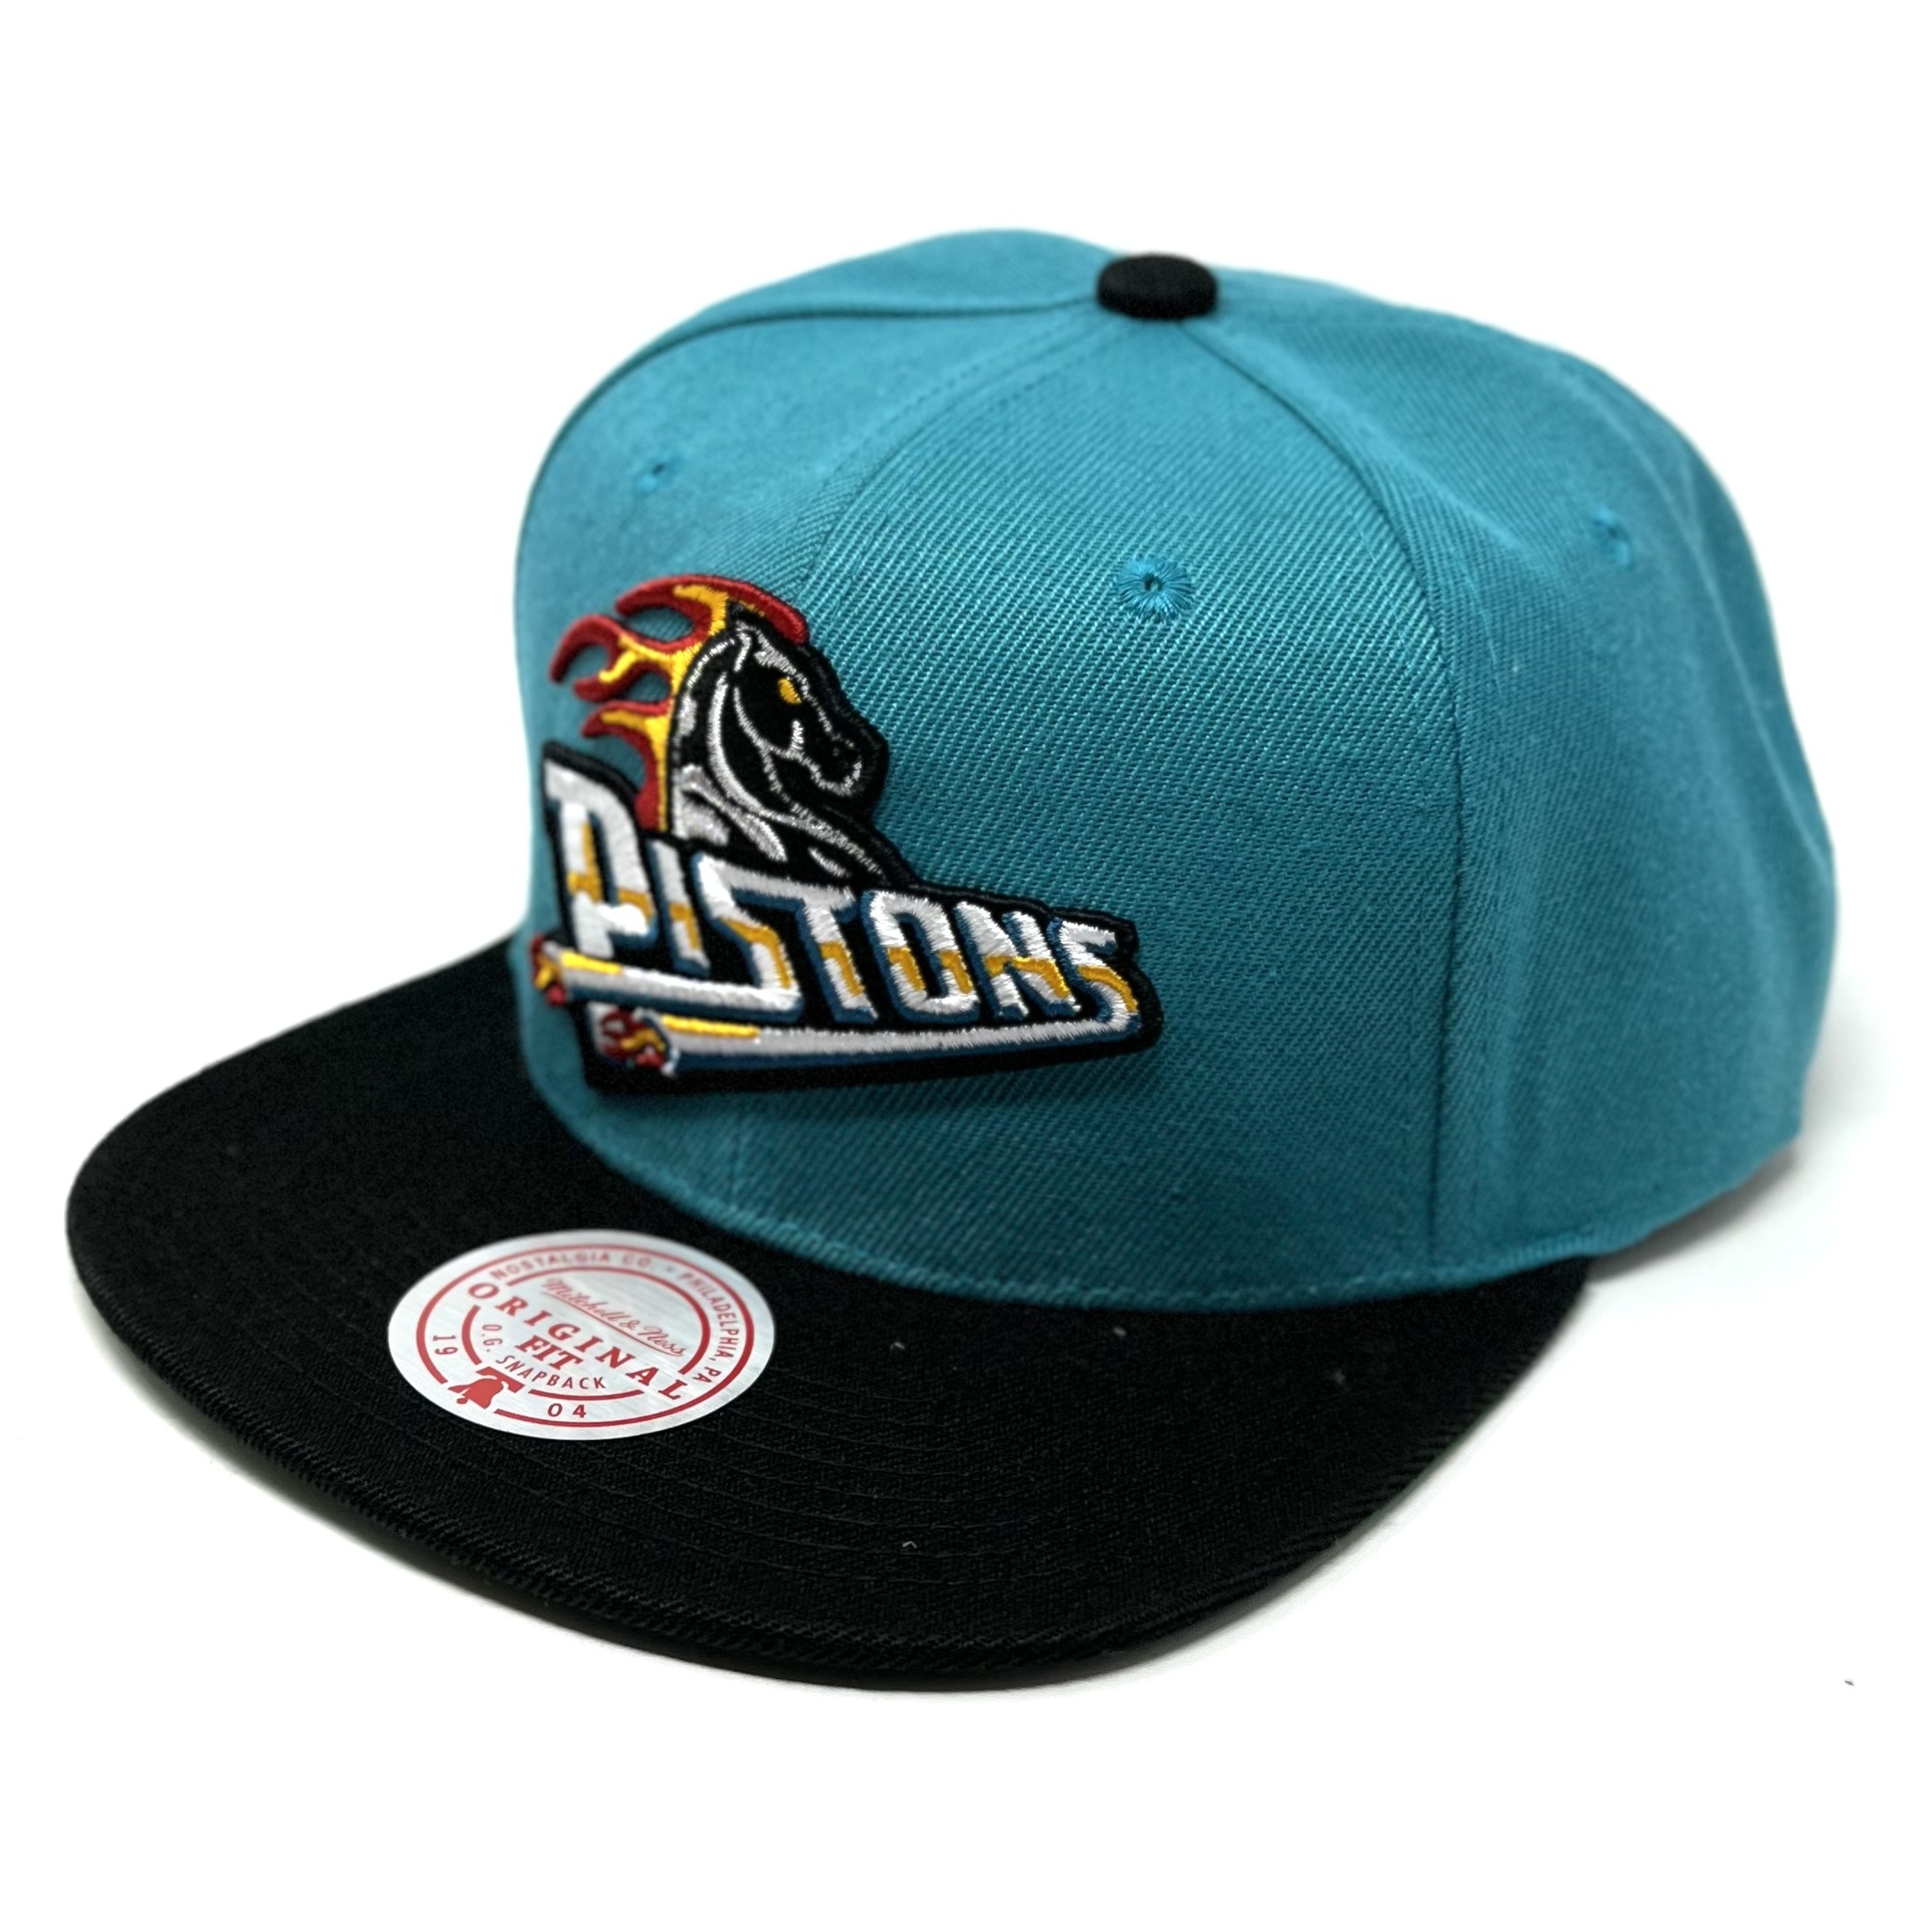 Buy the Detroit Pistons cap by Mitchell and Ness - Brooklyn Fizz